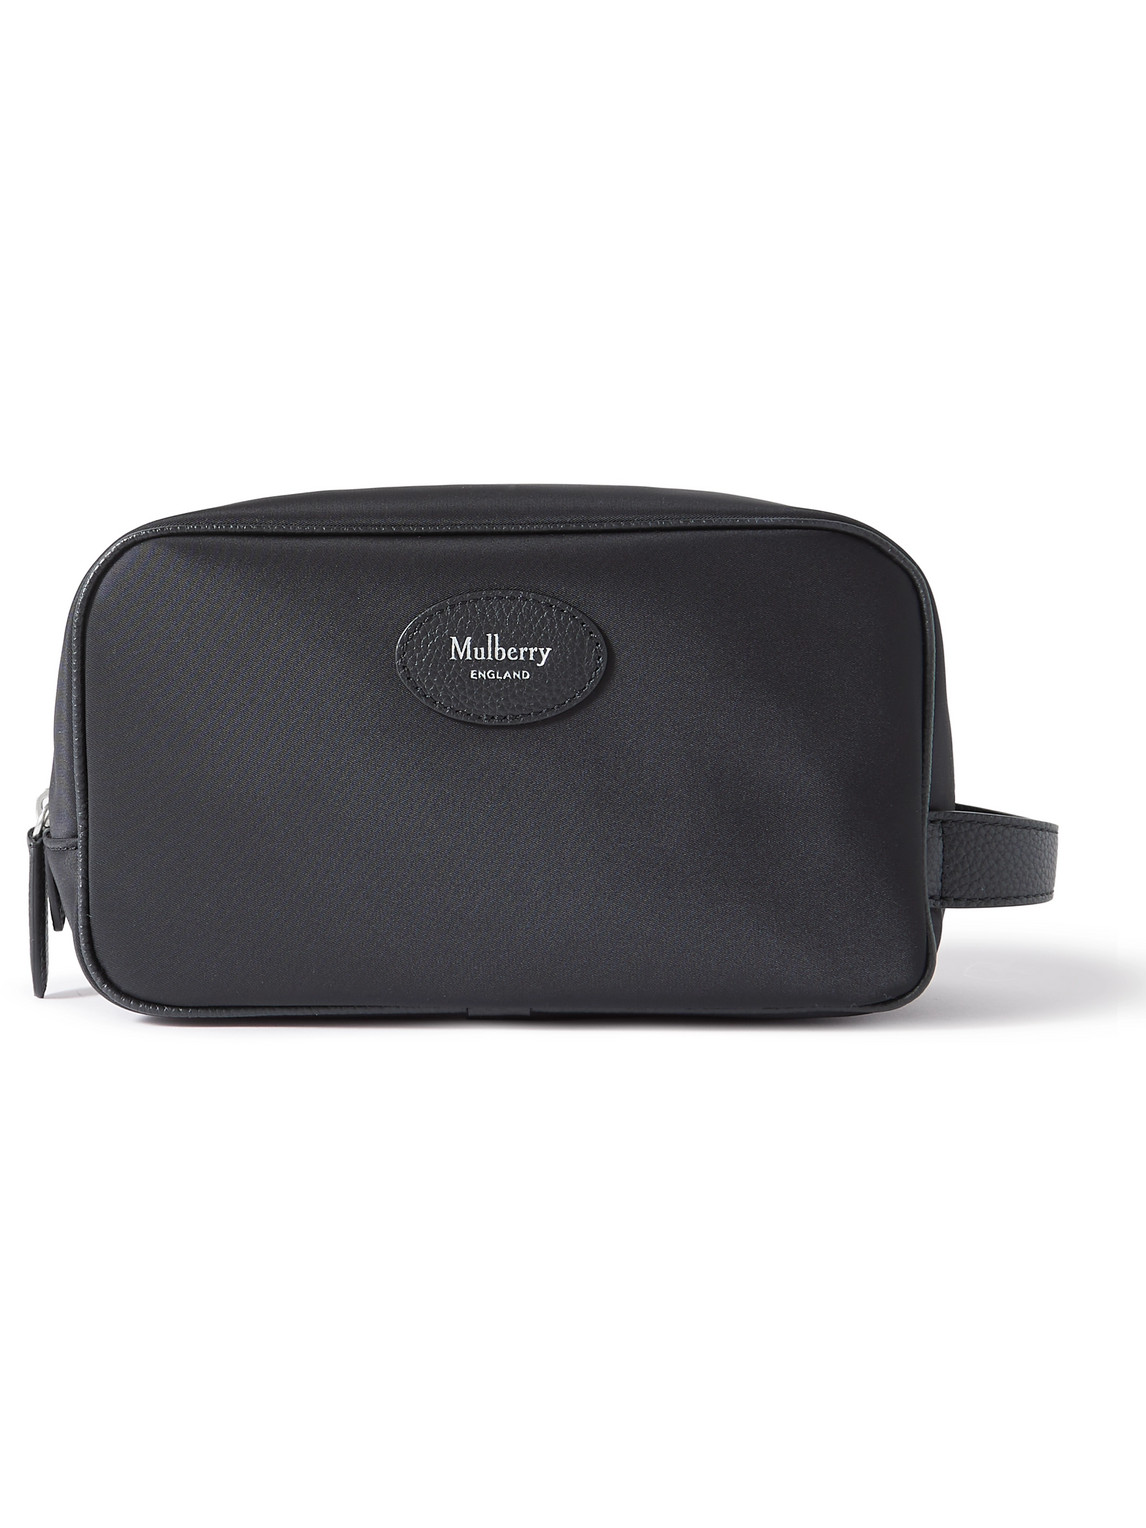 MULBERRY HERITAGE LEATHER-TRIMMED RECYCLED-SHELL WASH BAG